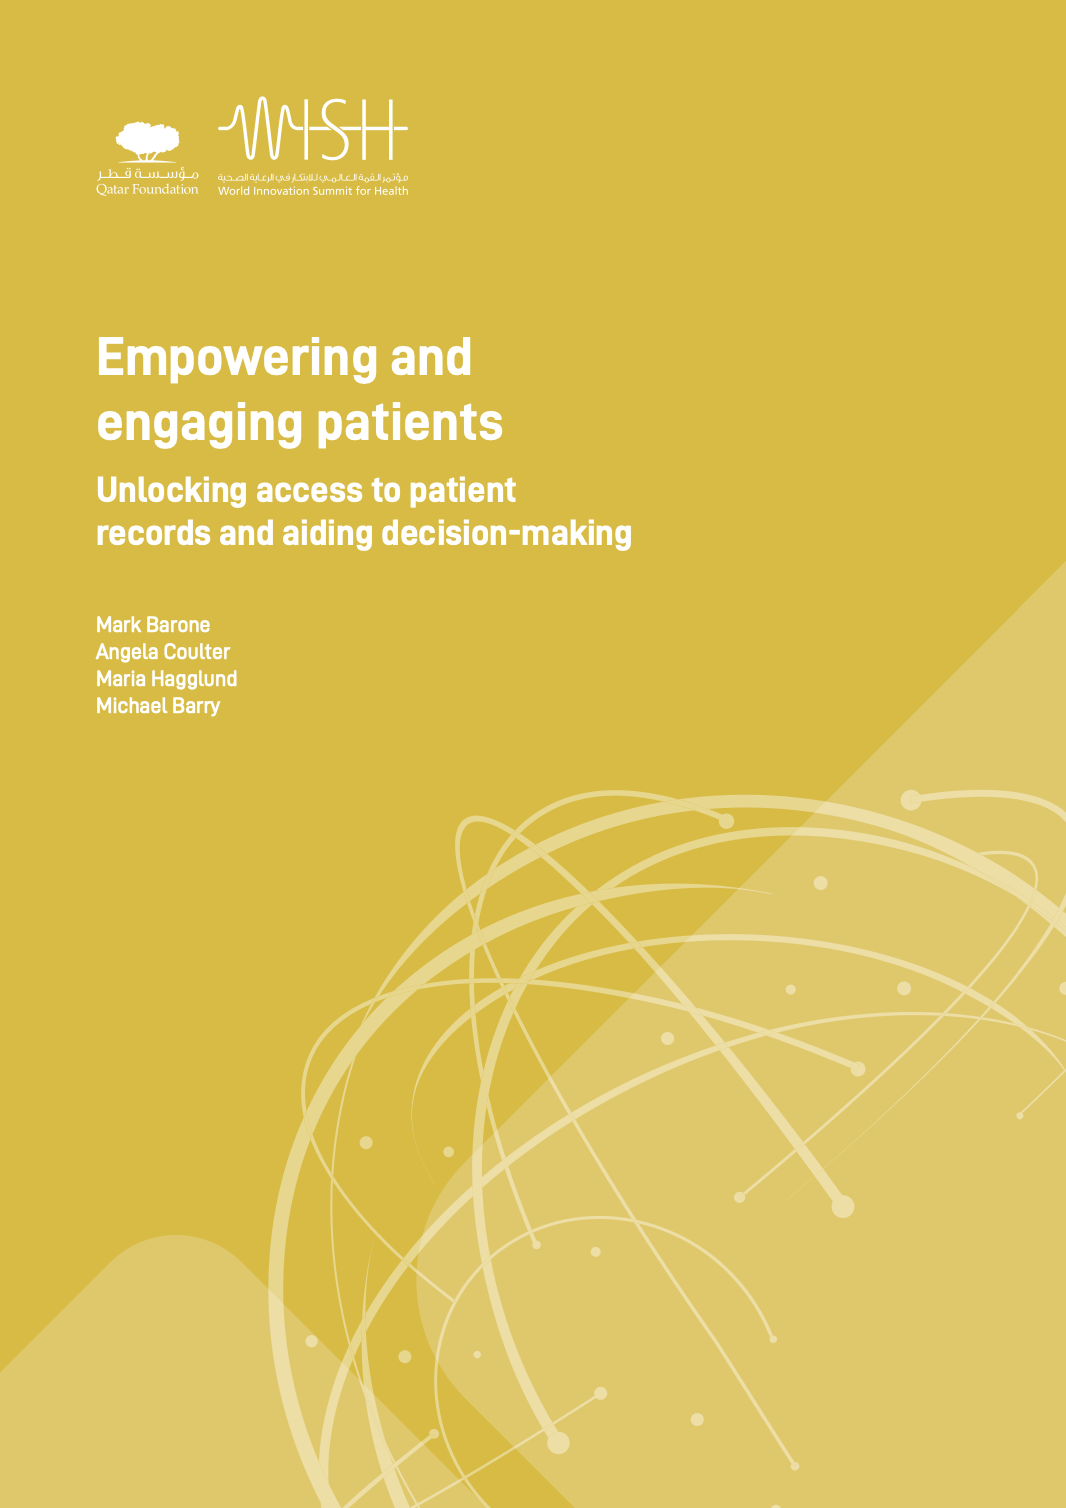 Unlocking access to patient records and aiding decision-making